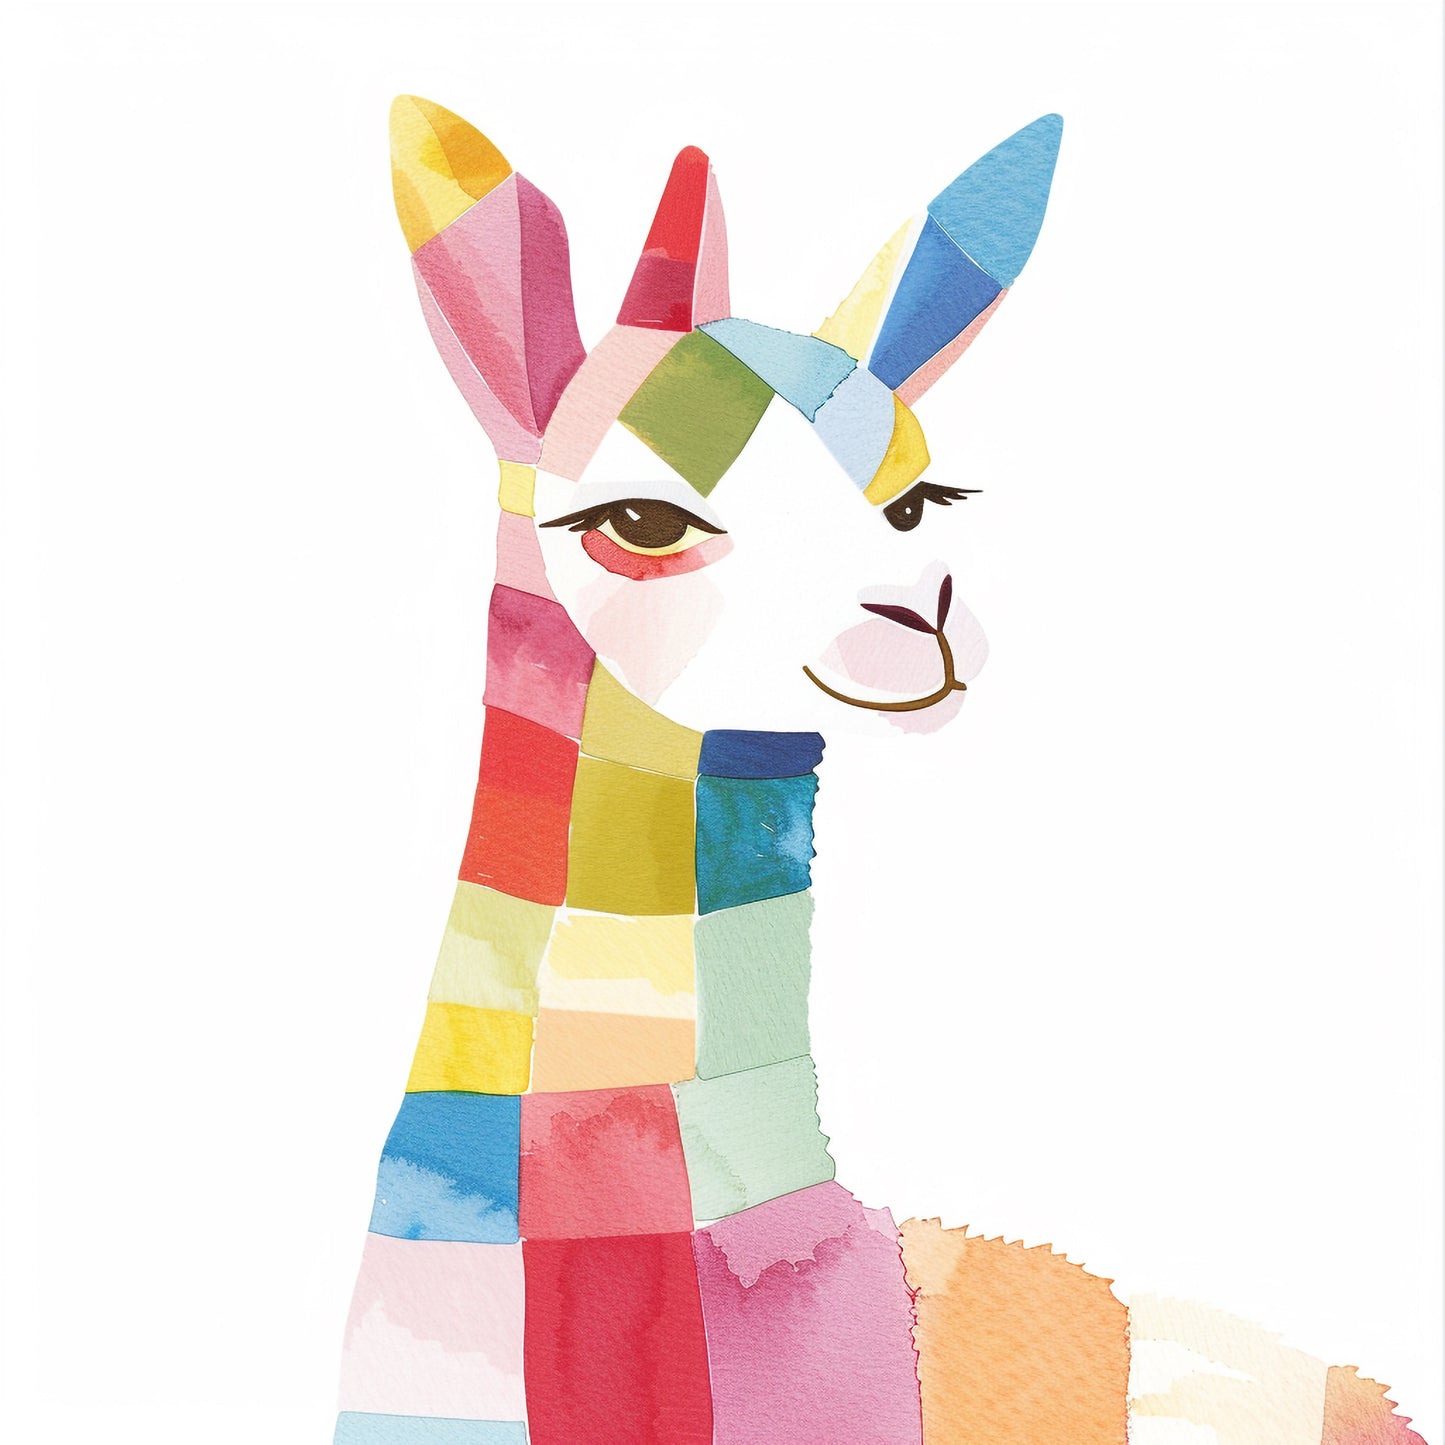 Colorful Watercolor Llama Illustration on White Background